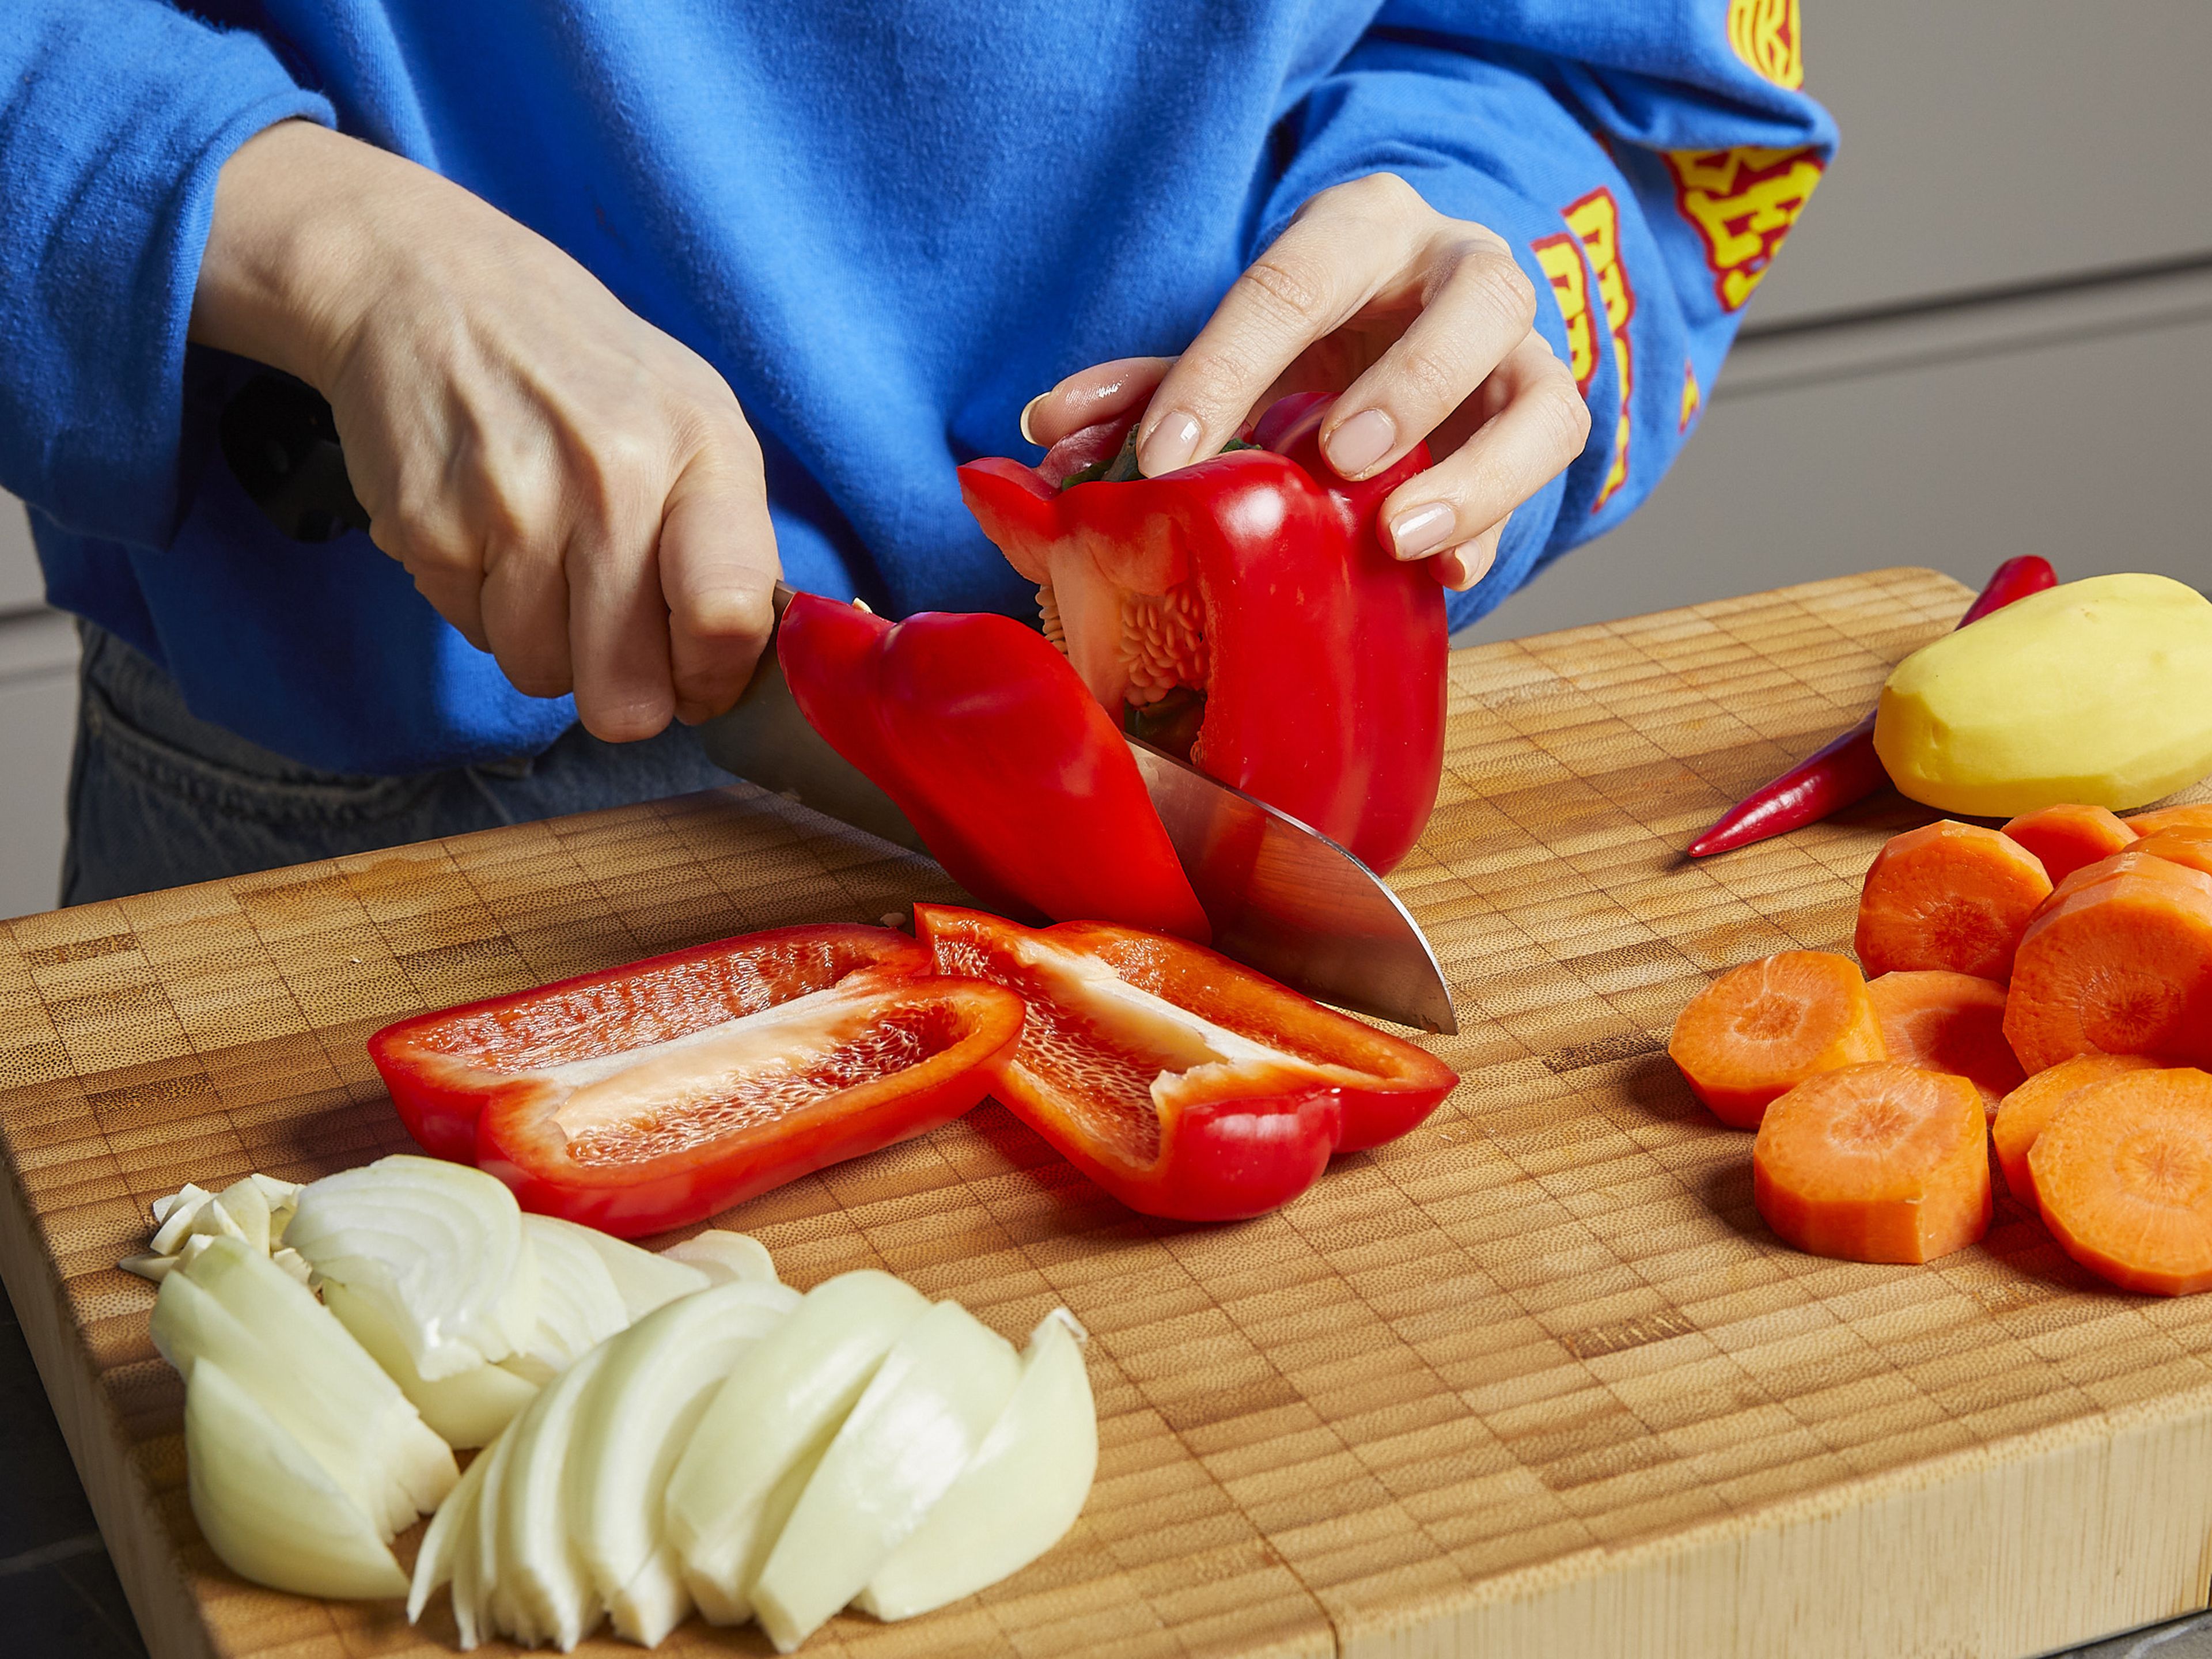 Peel the potato, carrot, onion, and garlic. Then, dice the potato, carrot, red bell pepper, and onion into bite sized pieces. Finely chop or cut the garlic and chili into thin rings.